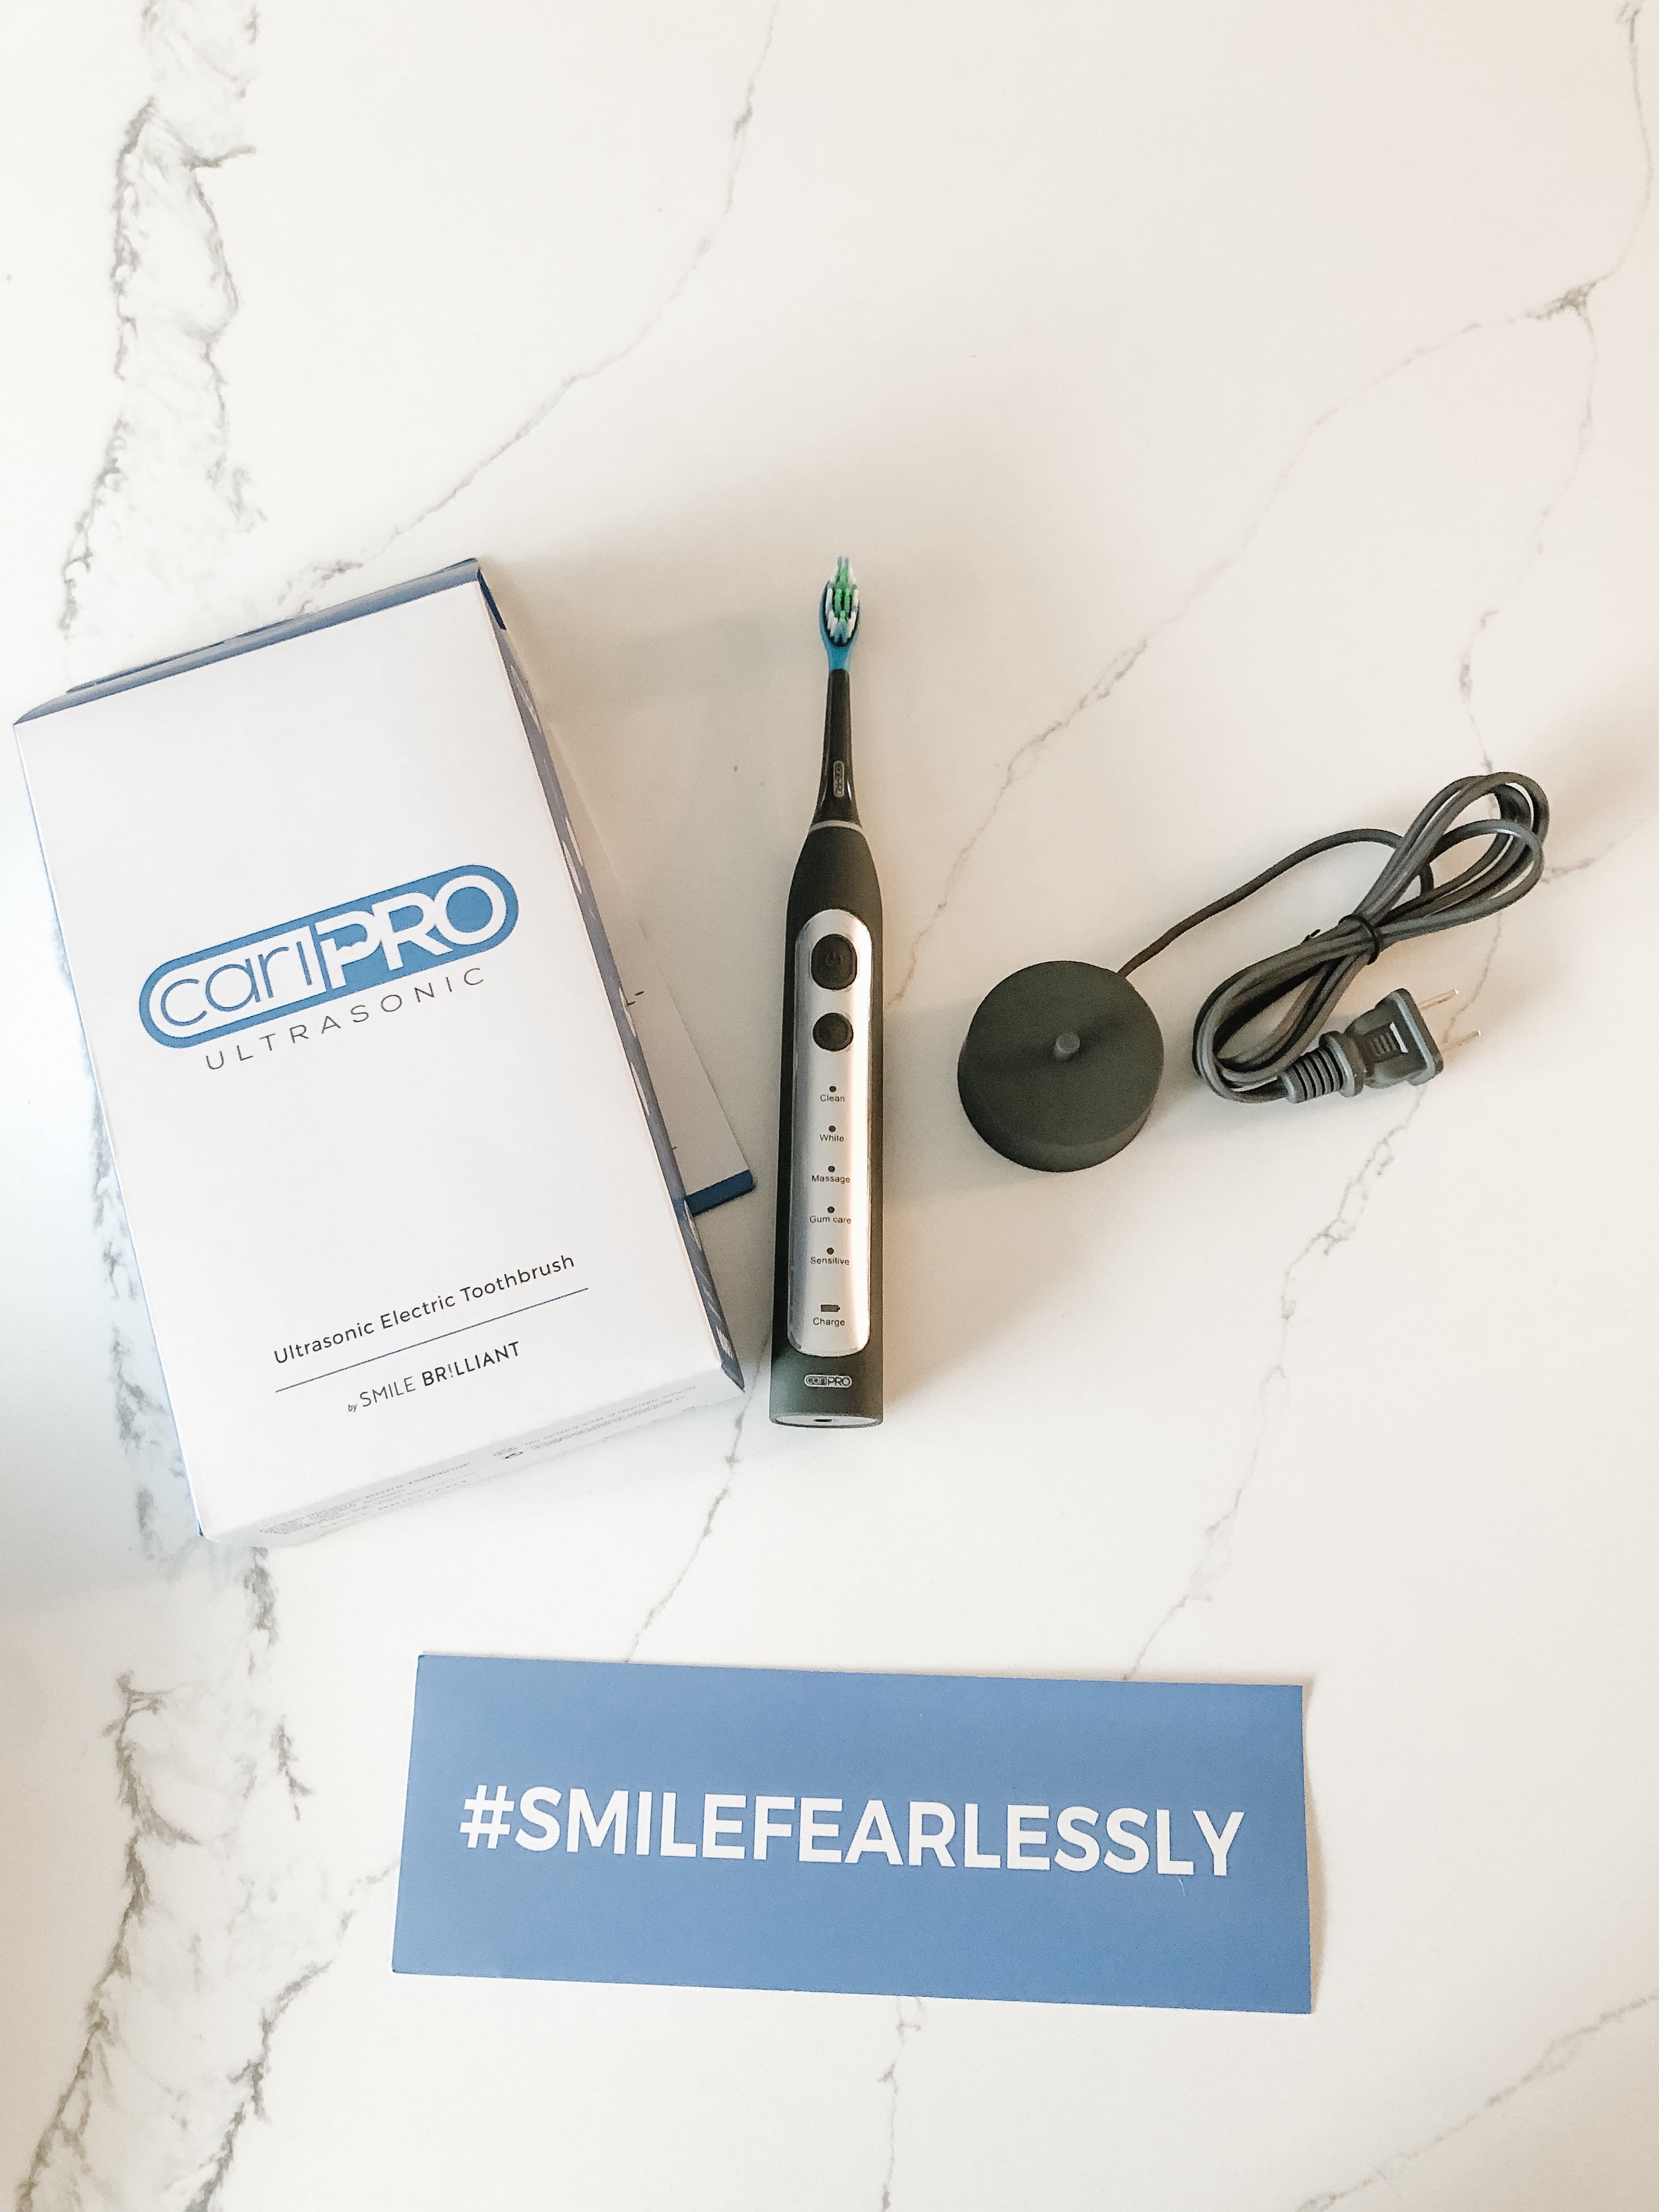 cariPRO Ultrasonic Electric Toothbrush Review {Giveaway}